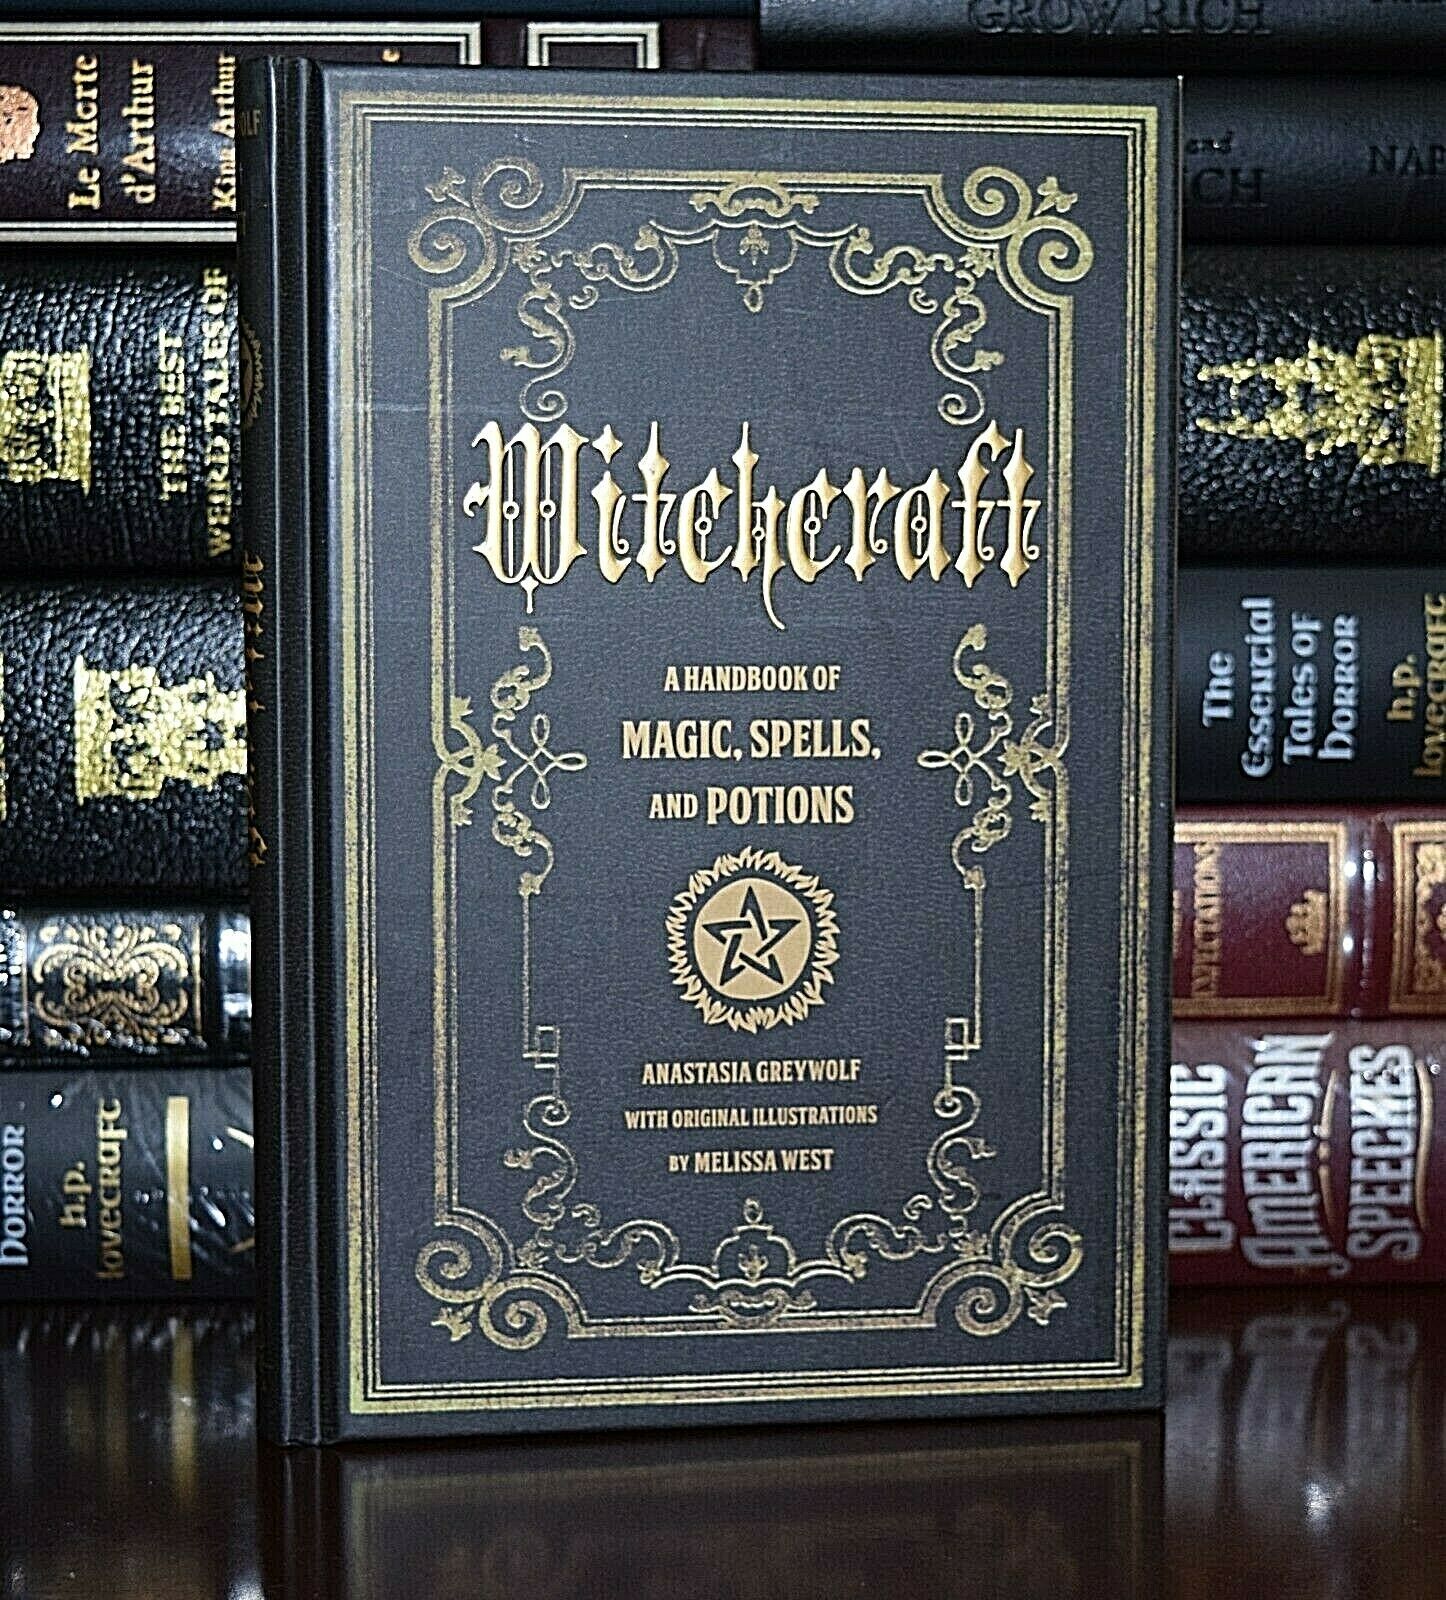 Witchcraft Handbook Of Magic Spells And Potions New Collectible Hardcover Gift